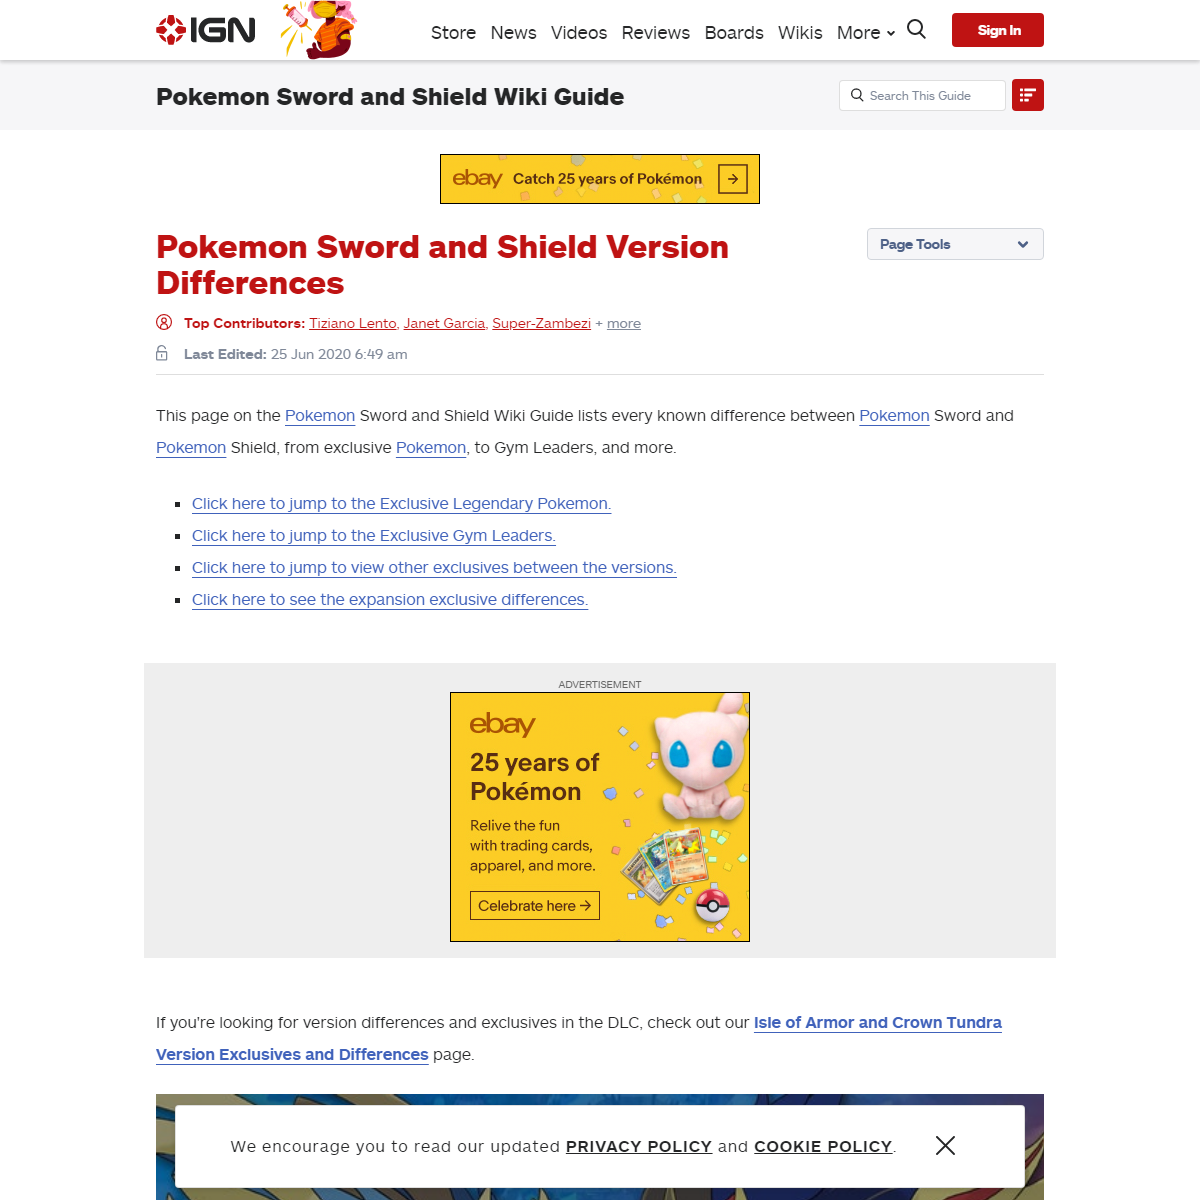 A complete backup of https://www.ign.com/wikis/pokemon-sword-shield/Pokemon_Sword_and_Shield_Version_Differences